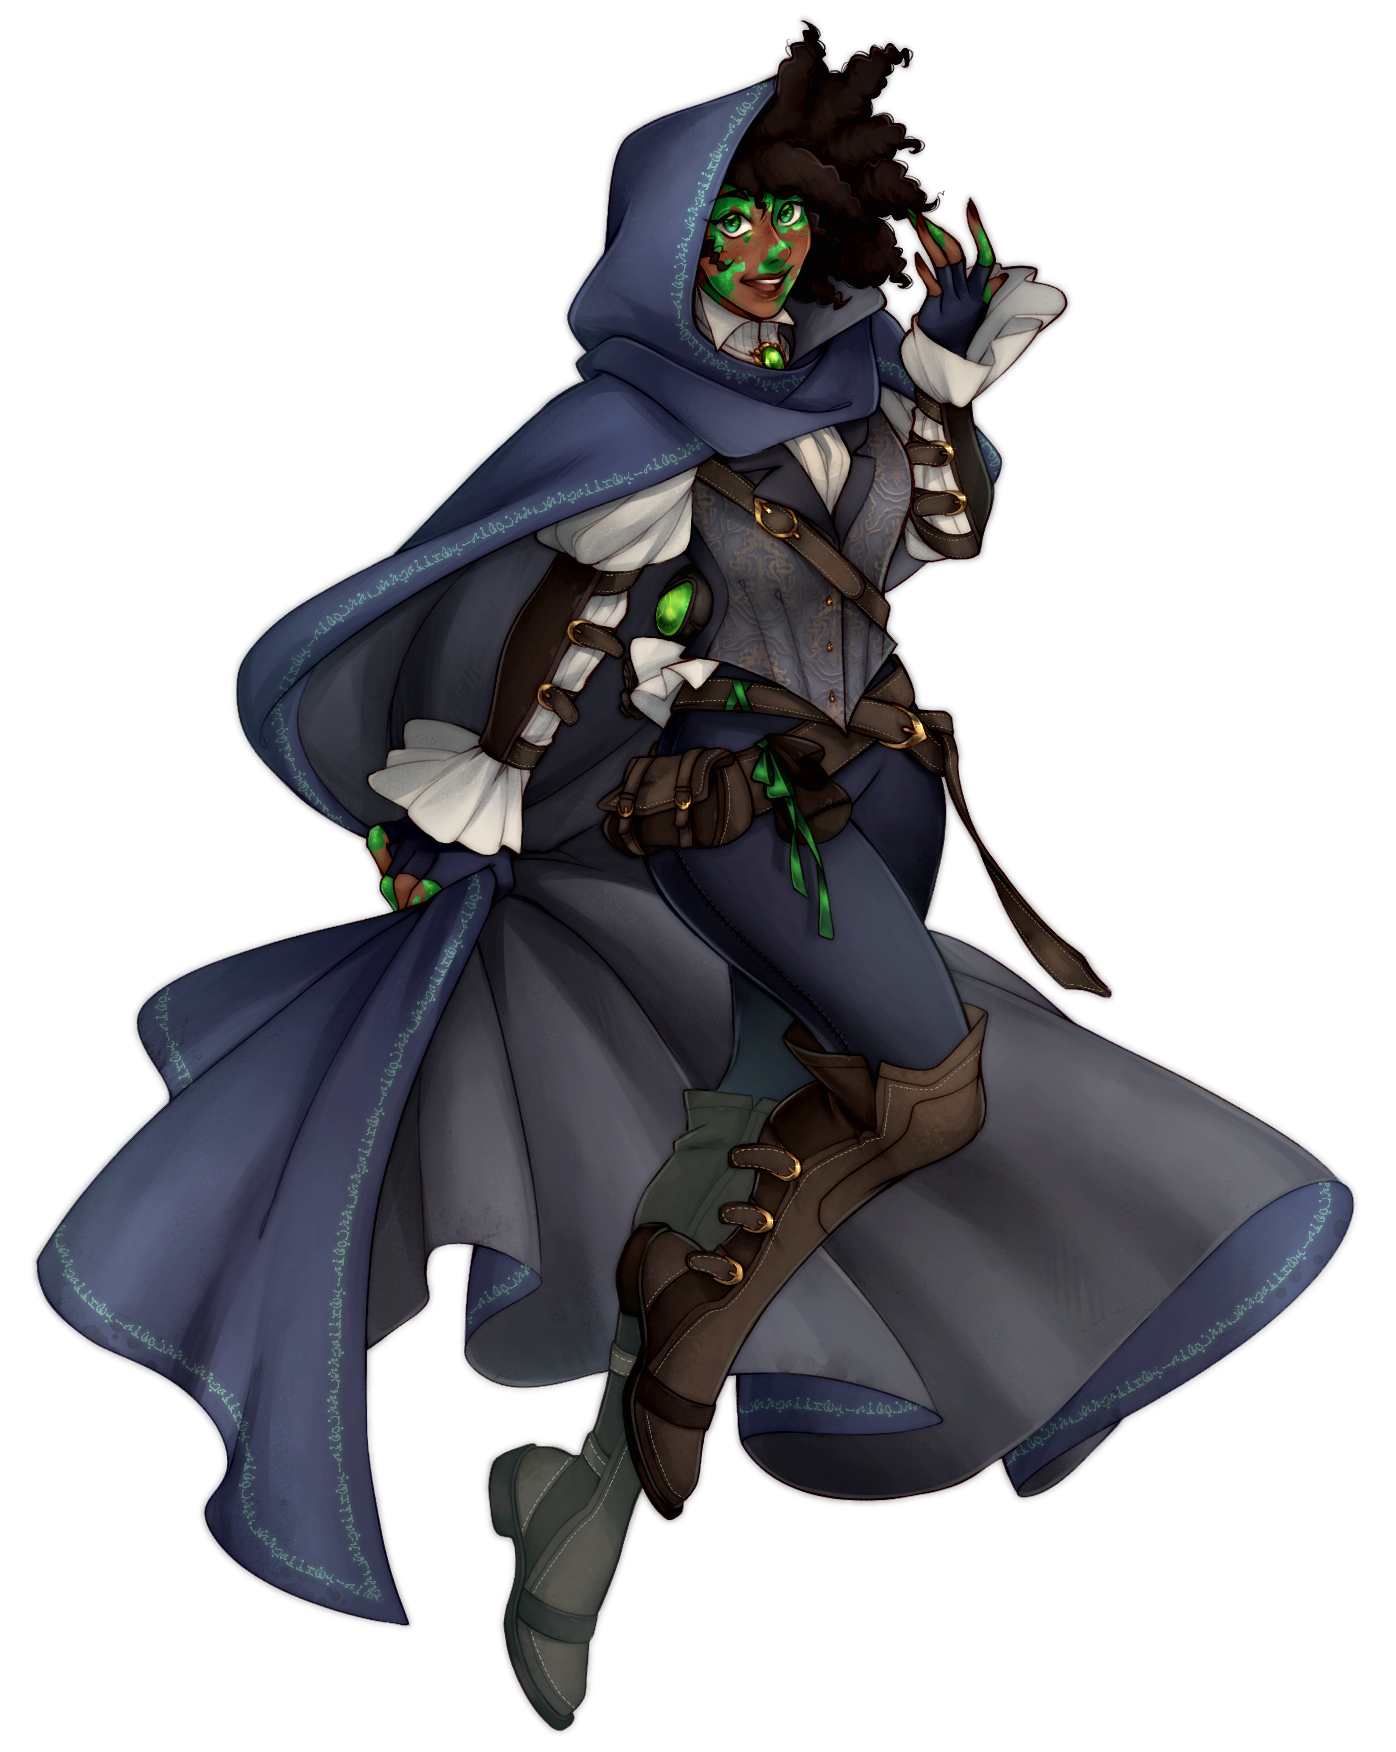 Ilsene in joyous motion with billowing cloak and thieve's gear. Her hair poking out of her hood above her face which highlights the her green eyes and matching vitiligo against her dark skin.